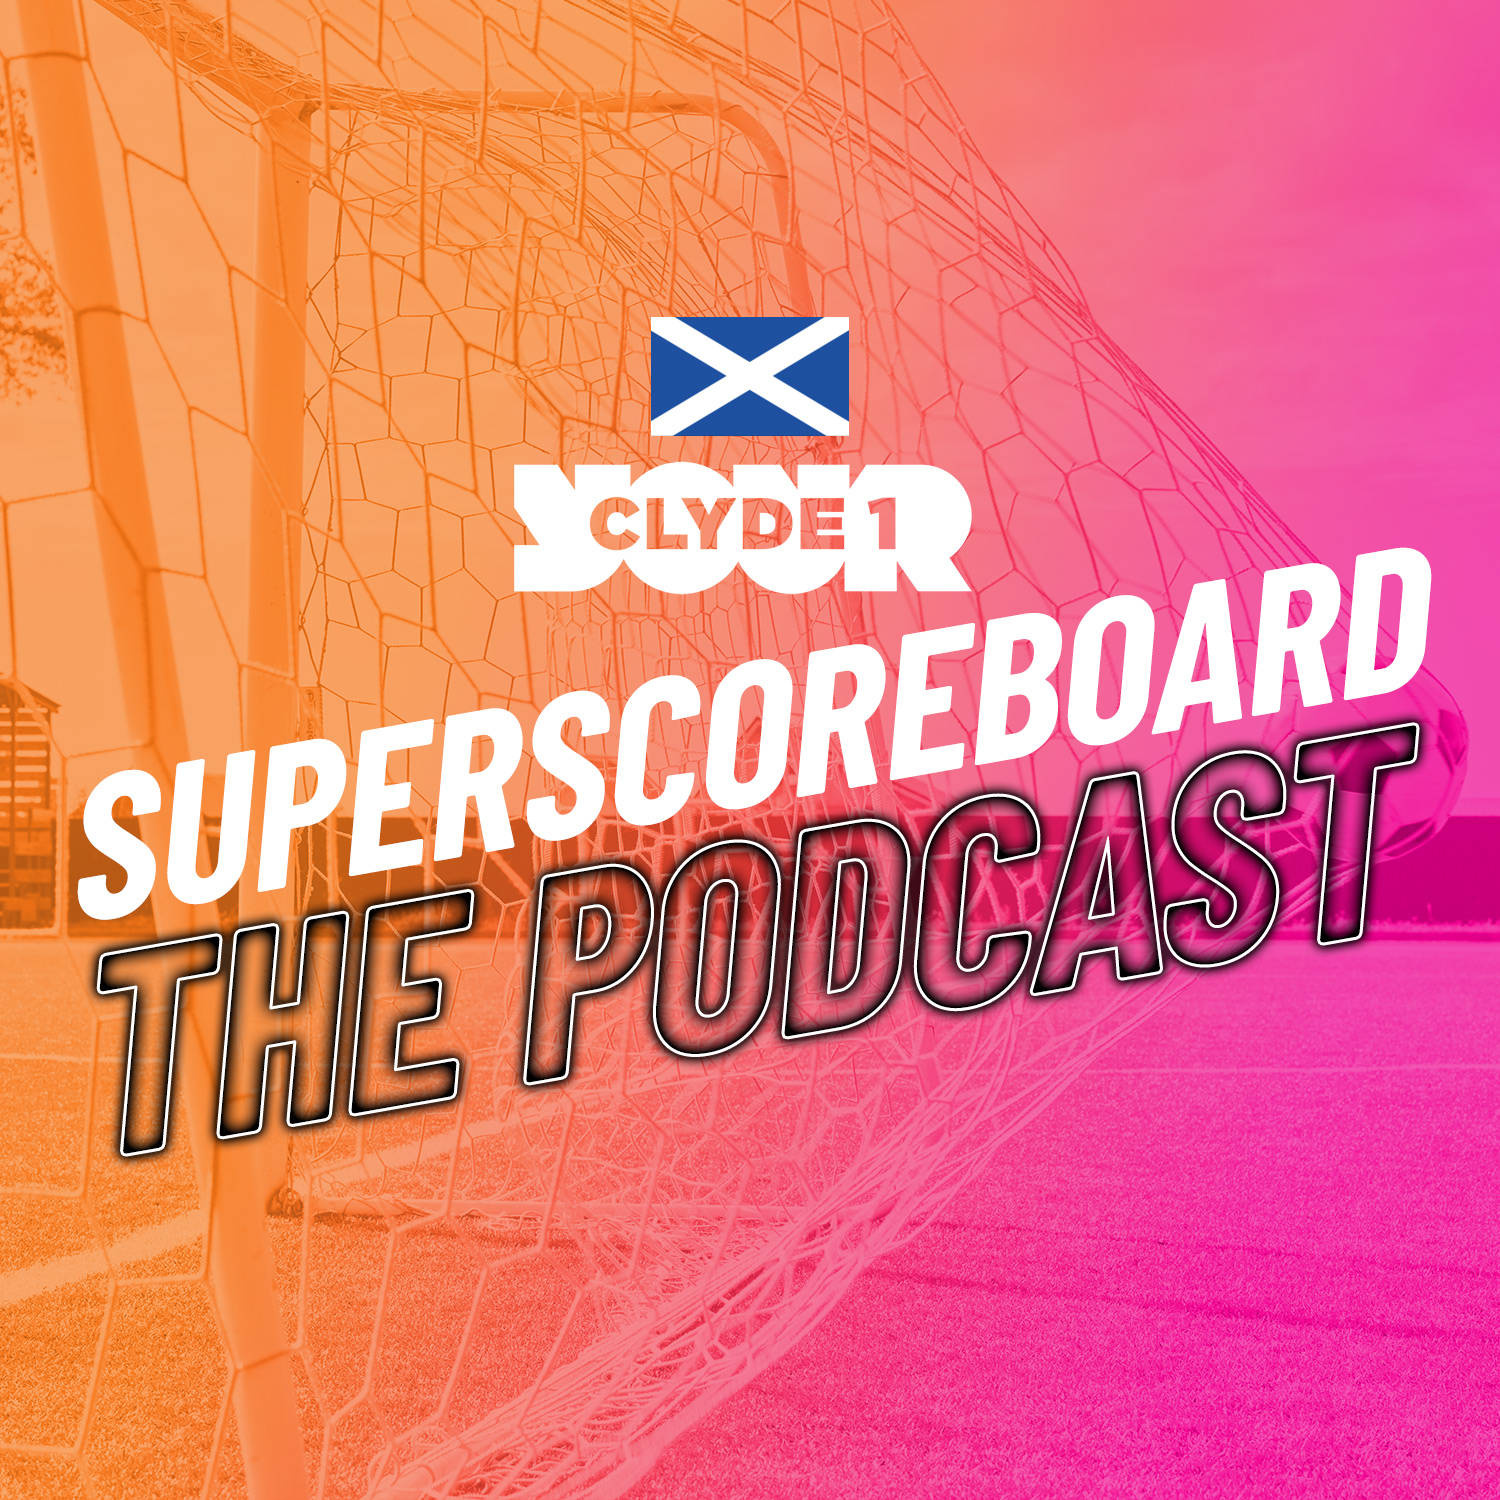 Saturday 9th March Clyde 1 Superscoreboard Open Line